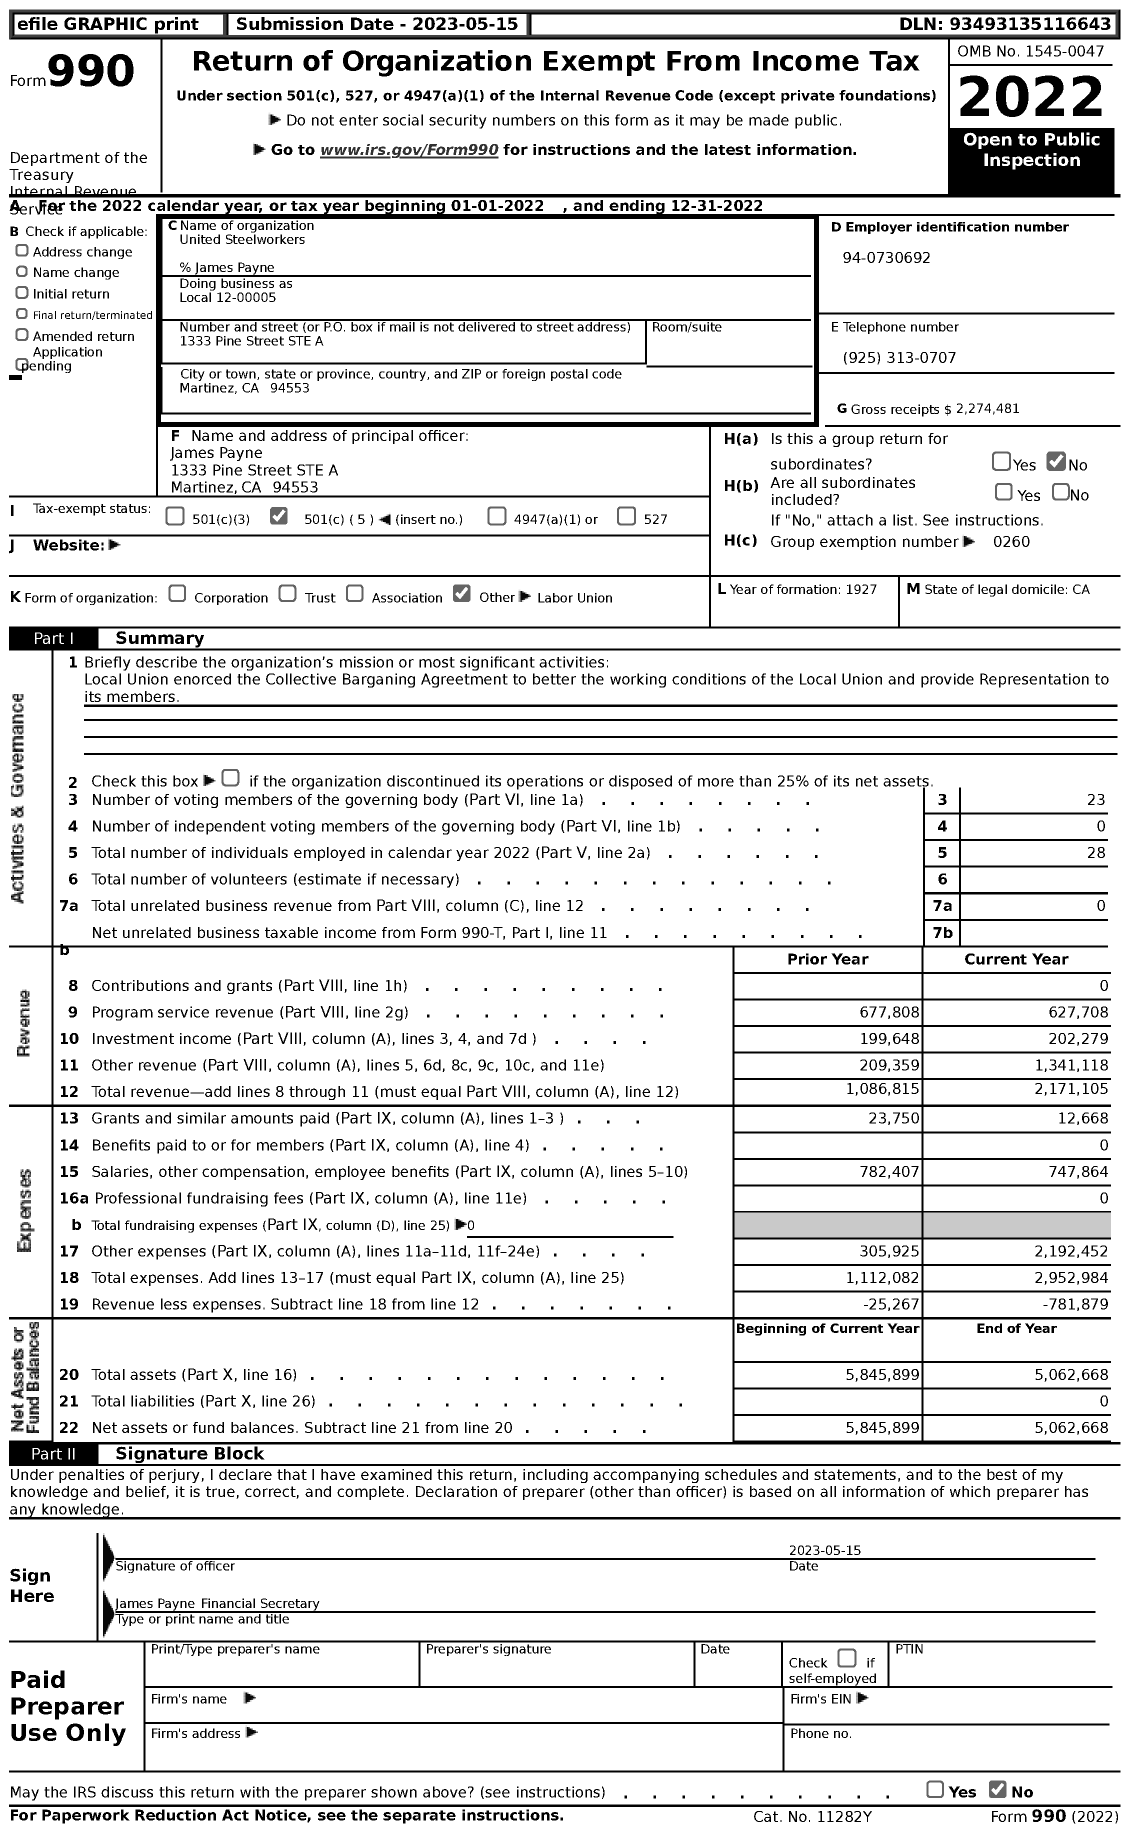 Image of first page of 2022 Form 990 for United Steelworkers Local 12-00005